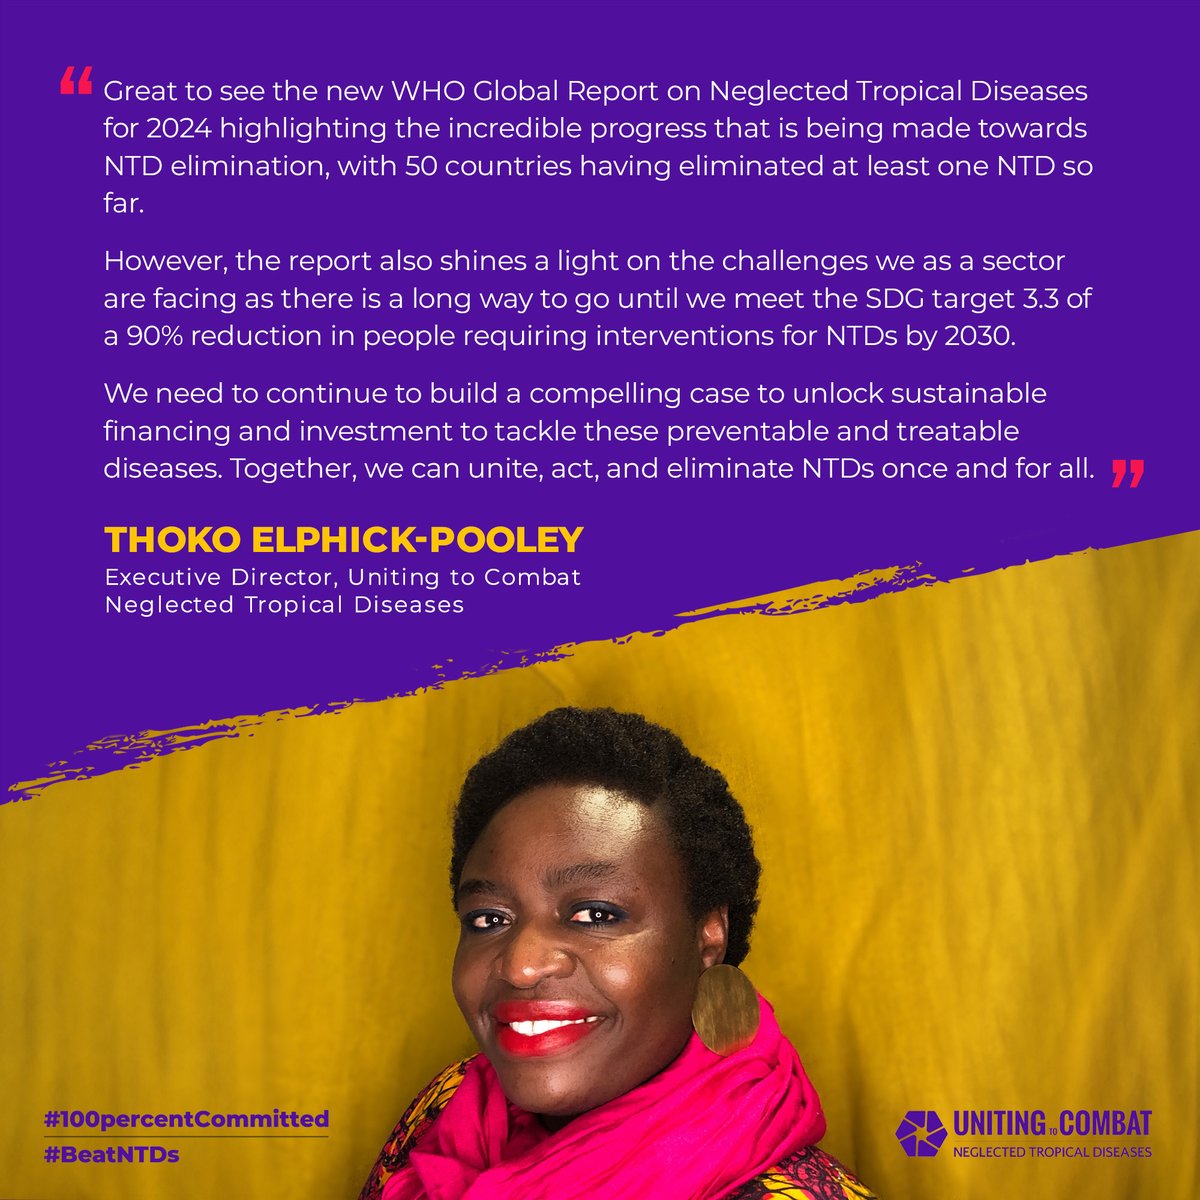 The @WHO Global Report on Neglected Tropical Diseases 2024 is out, highlighting incredible progress to #BeatNTDs! Our Exec Director @ThokoPooley responds to its release & stresses the need for sustainable financing to eliminate NTDs for good. Full report: who.int/teams/control-…